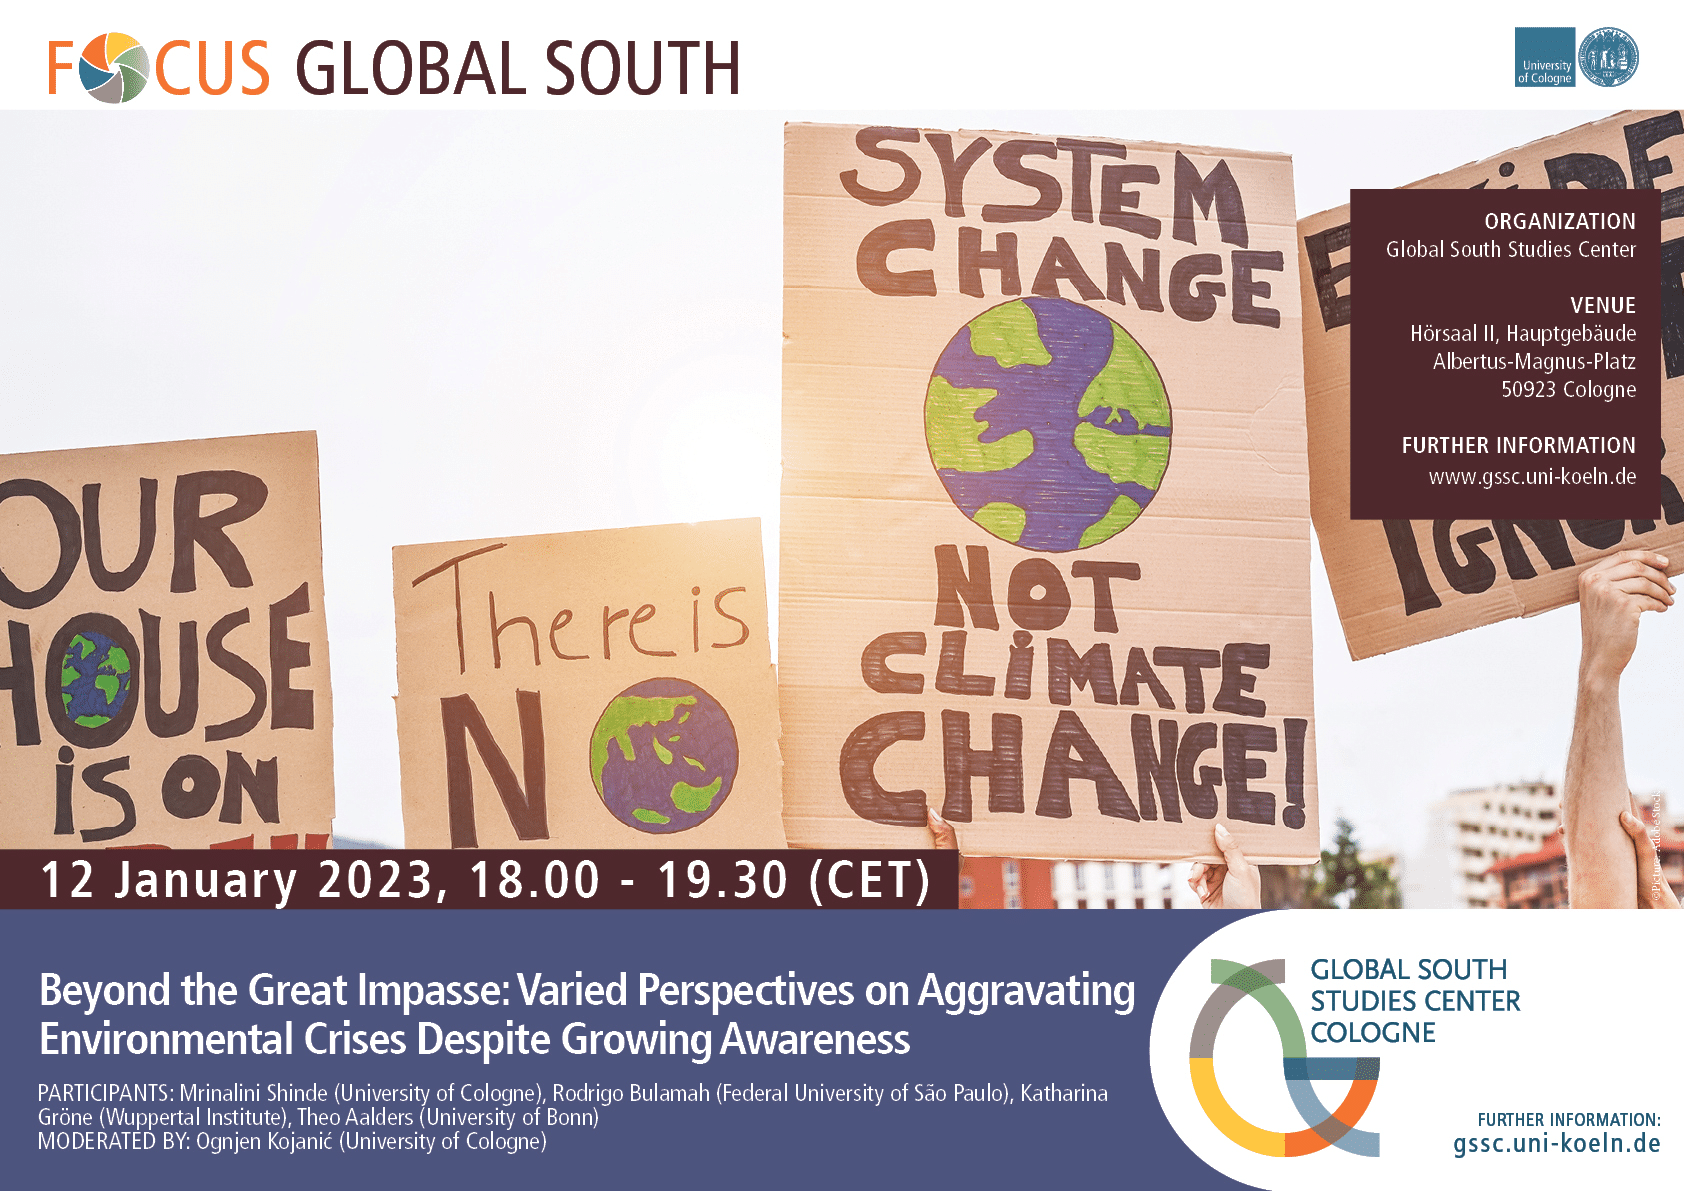 GSSC Focus – Panel discussion: Beyond the Great Impasse: Varied Perspectives on Aggravating Environmental Crises Despite Growing Awareness